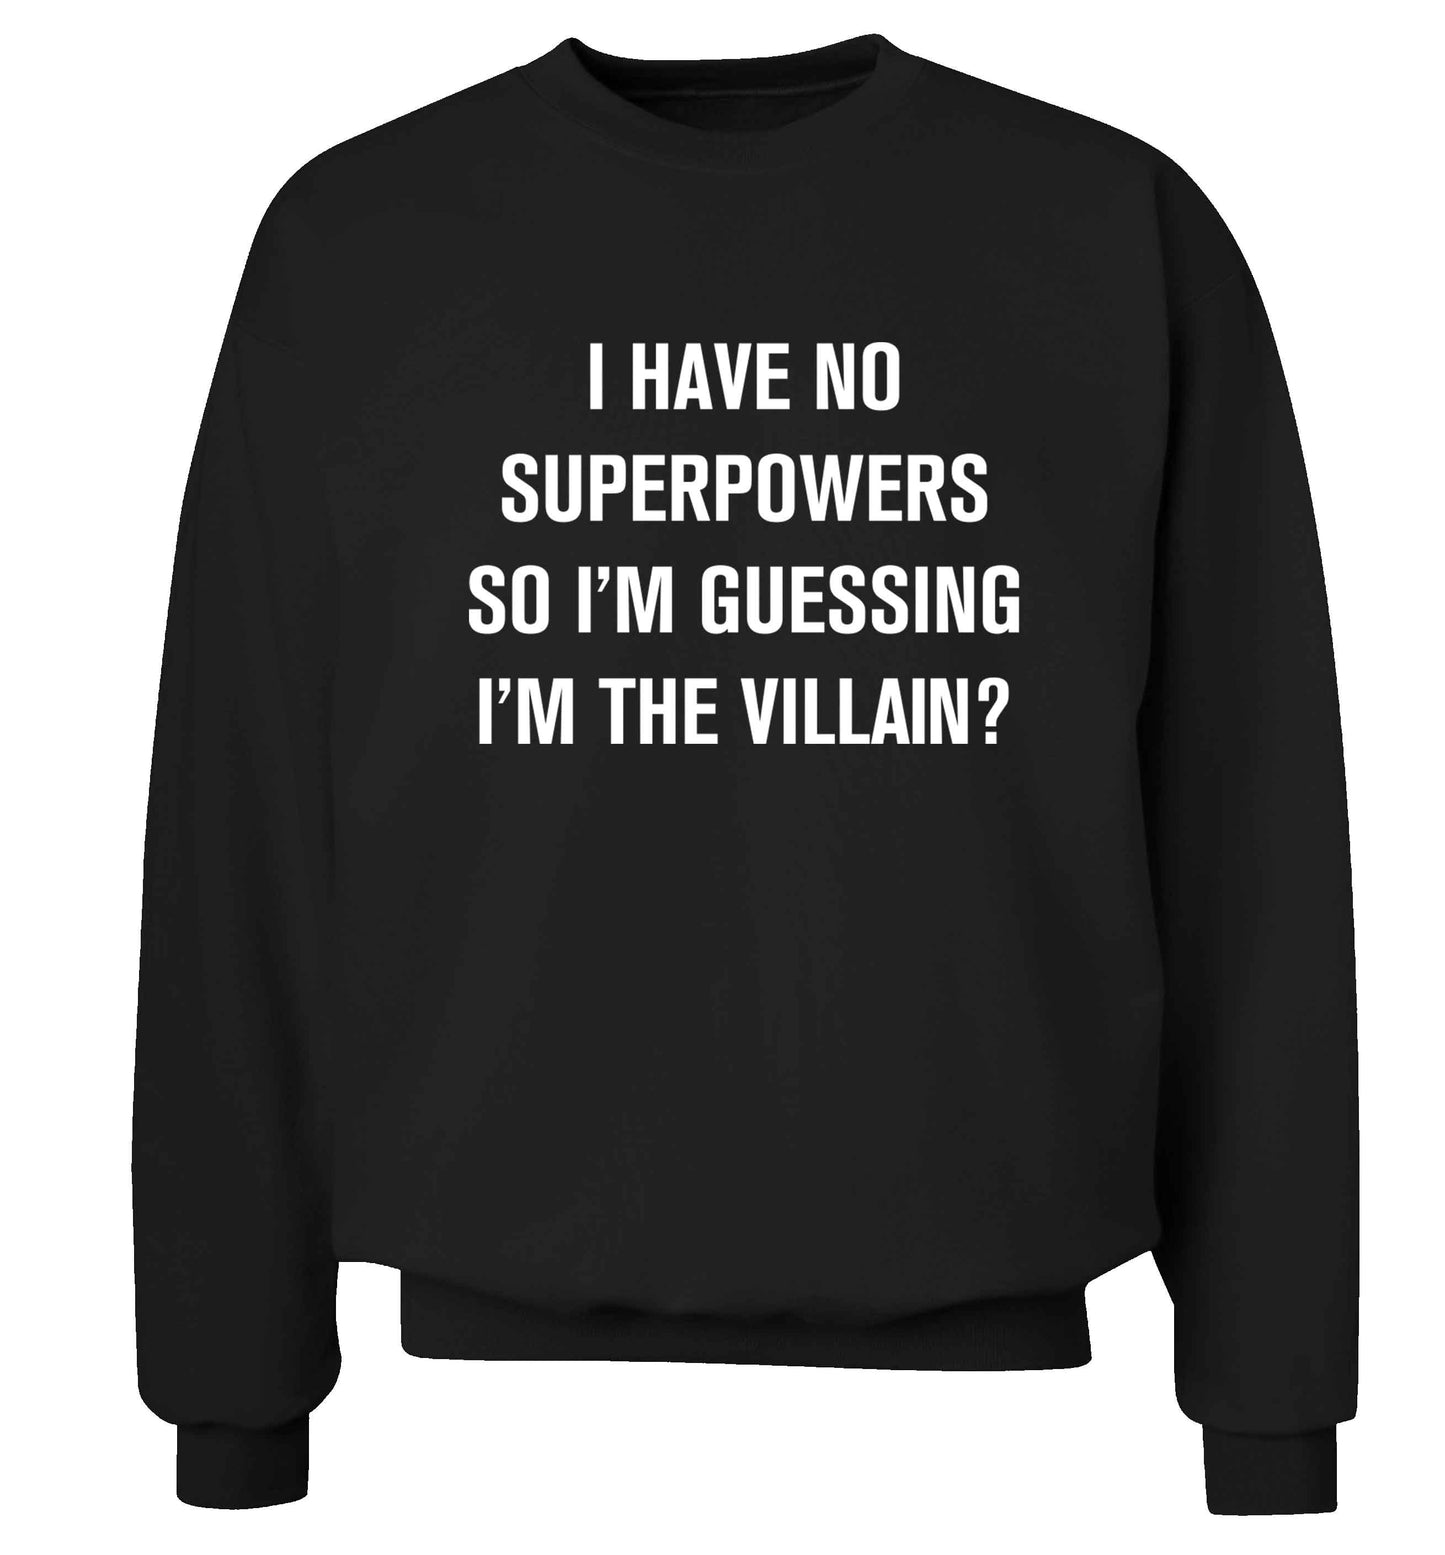 I have no superpowers so I'm guessing I'm the villain? Adult's unisex black Sweater 2XL